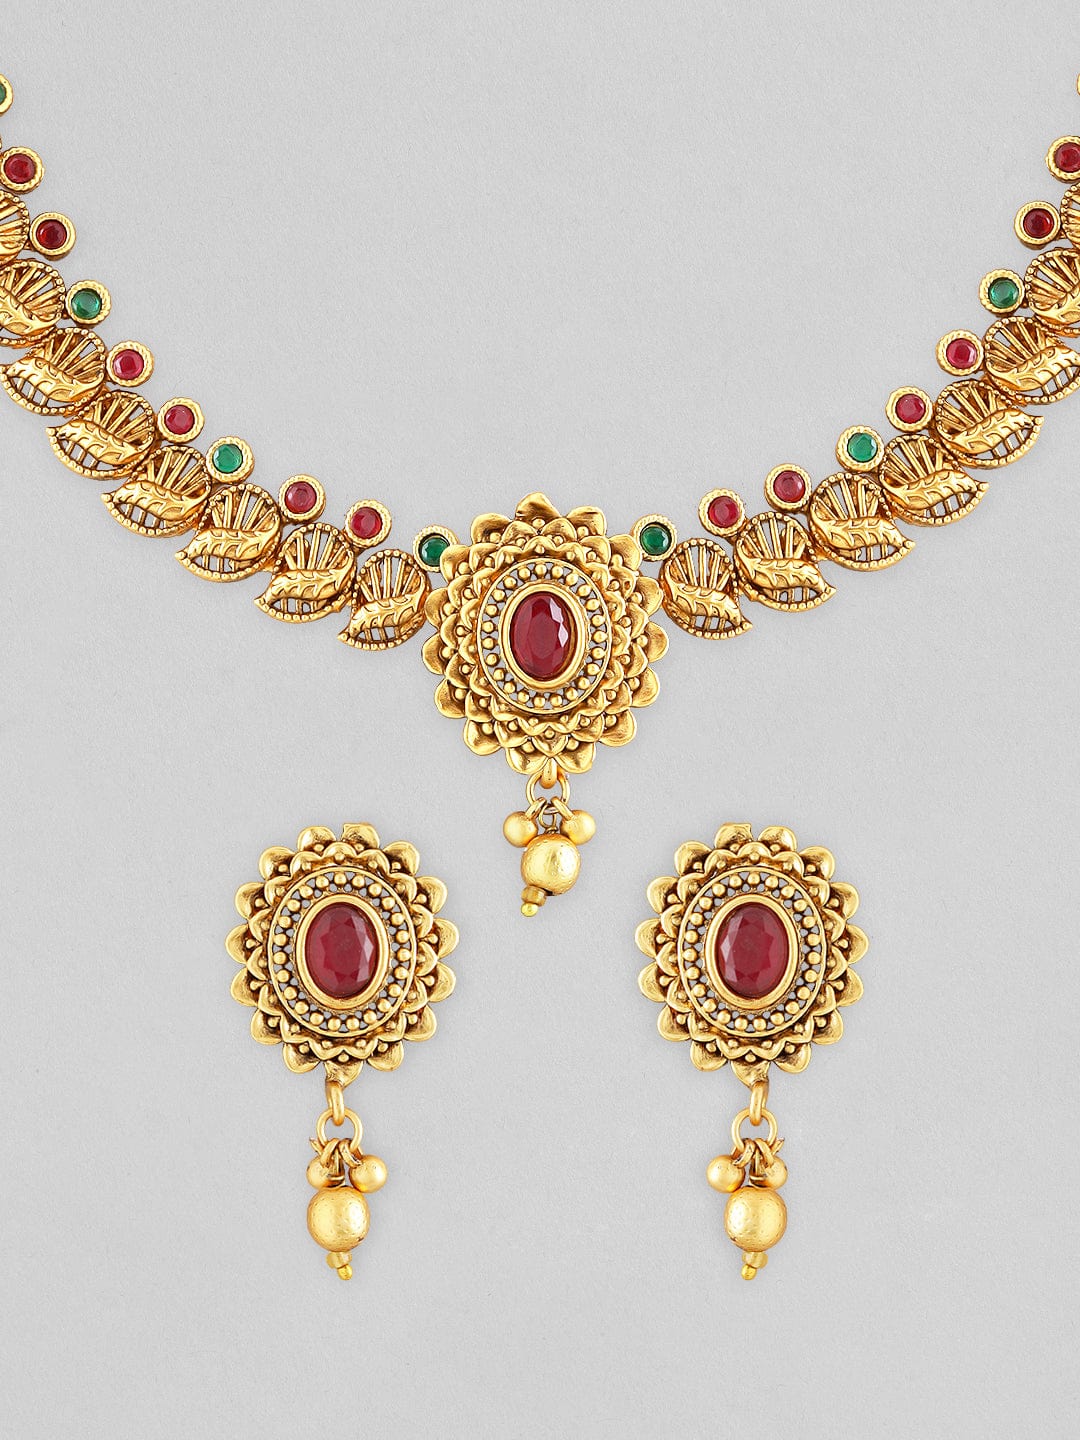 Rubans 24k Gold Plated Choker Set With Red And Green Stones. Choker Necklace Set